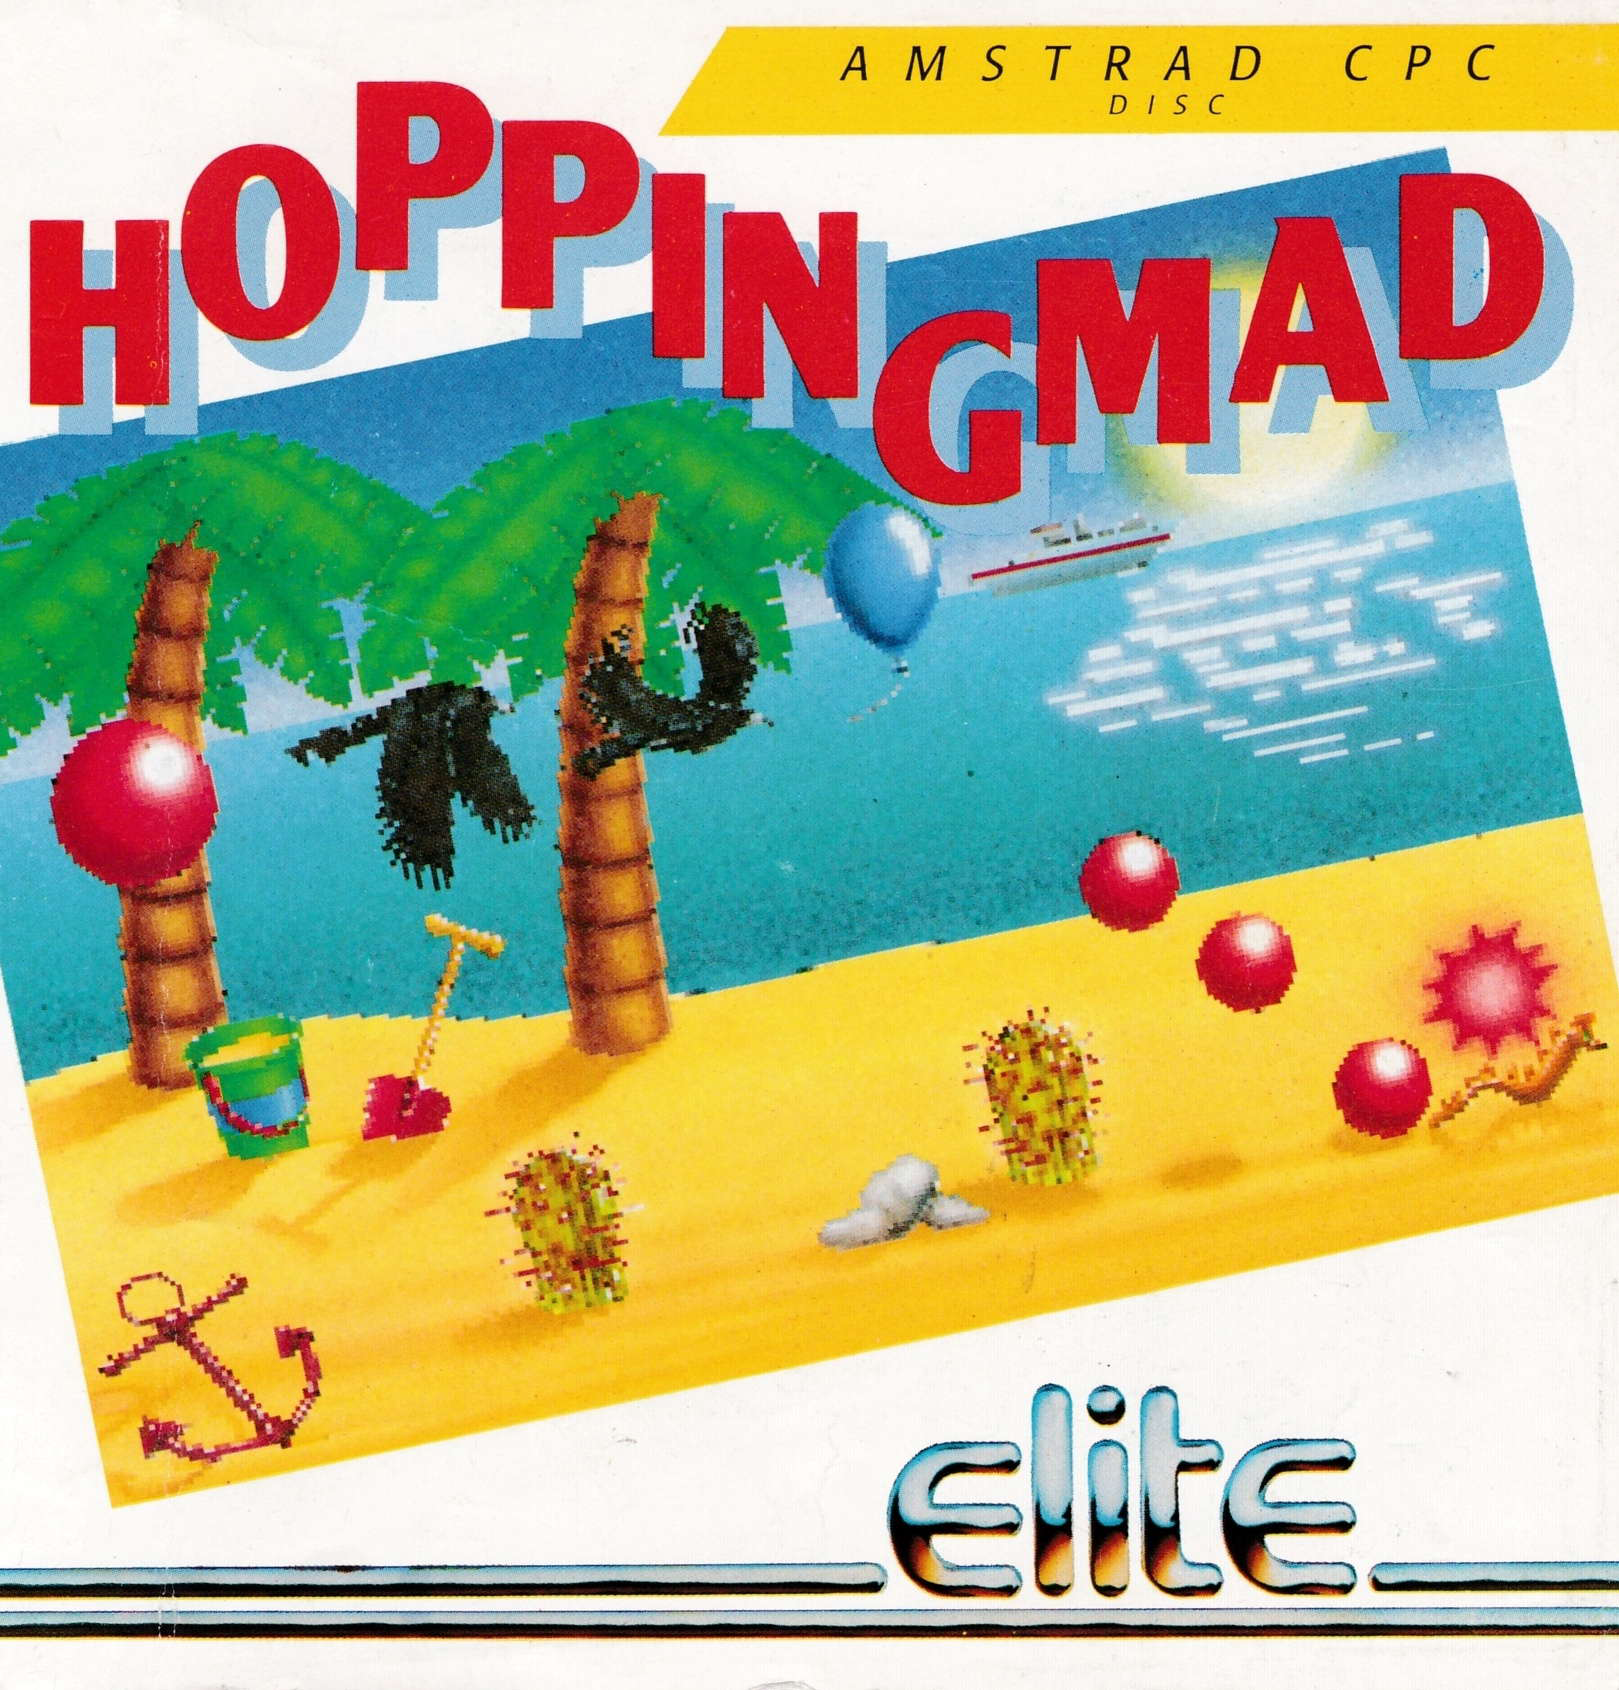 cover of the Amstrad CPC game Hopping Mad  by GameBase CPC